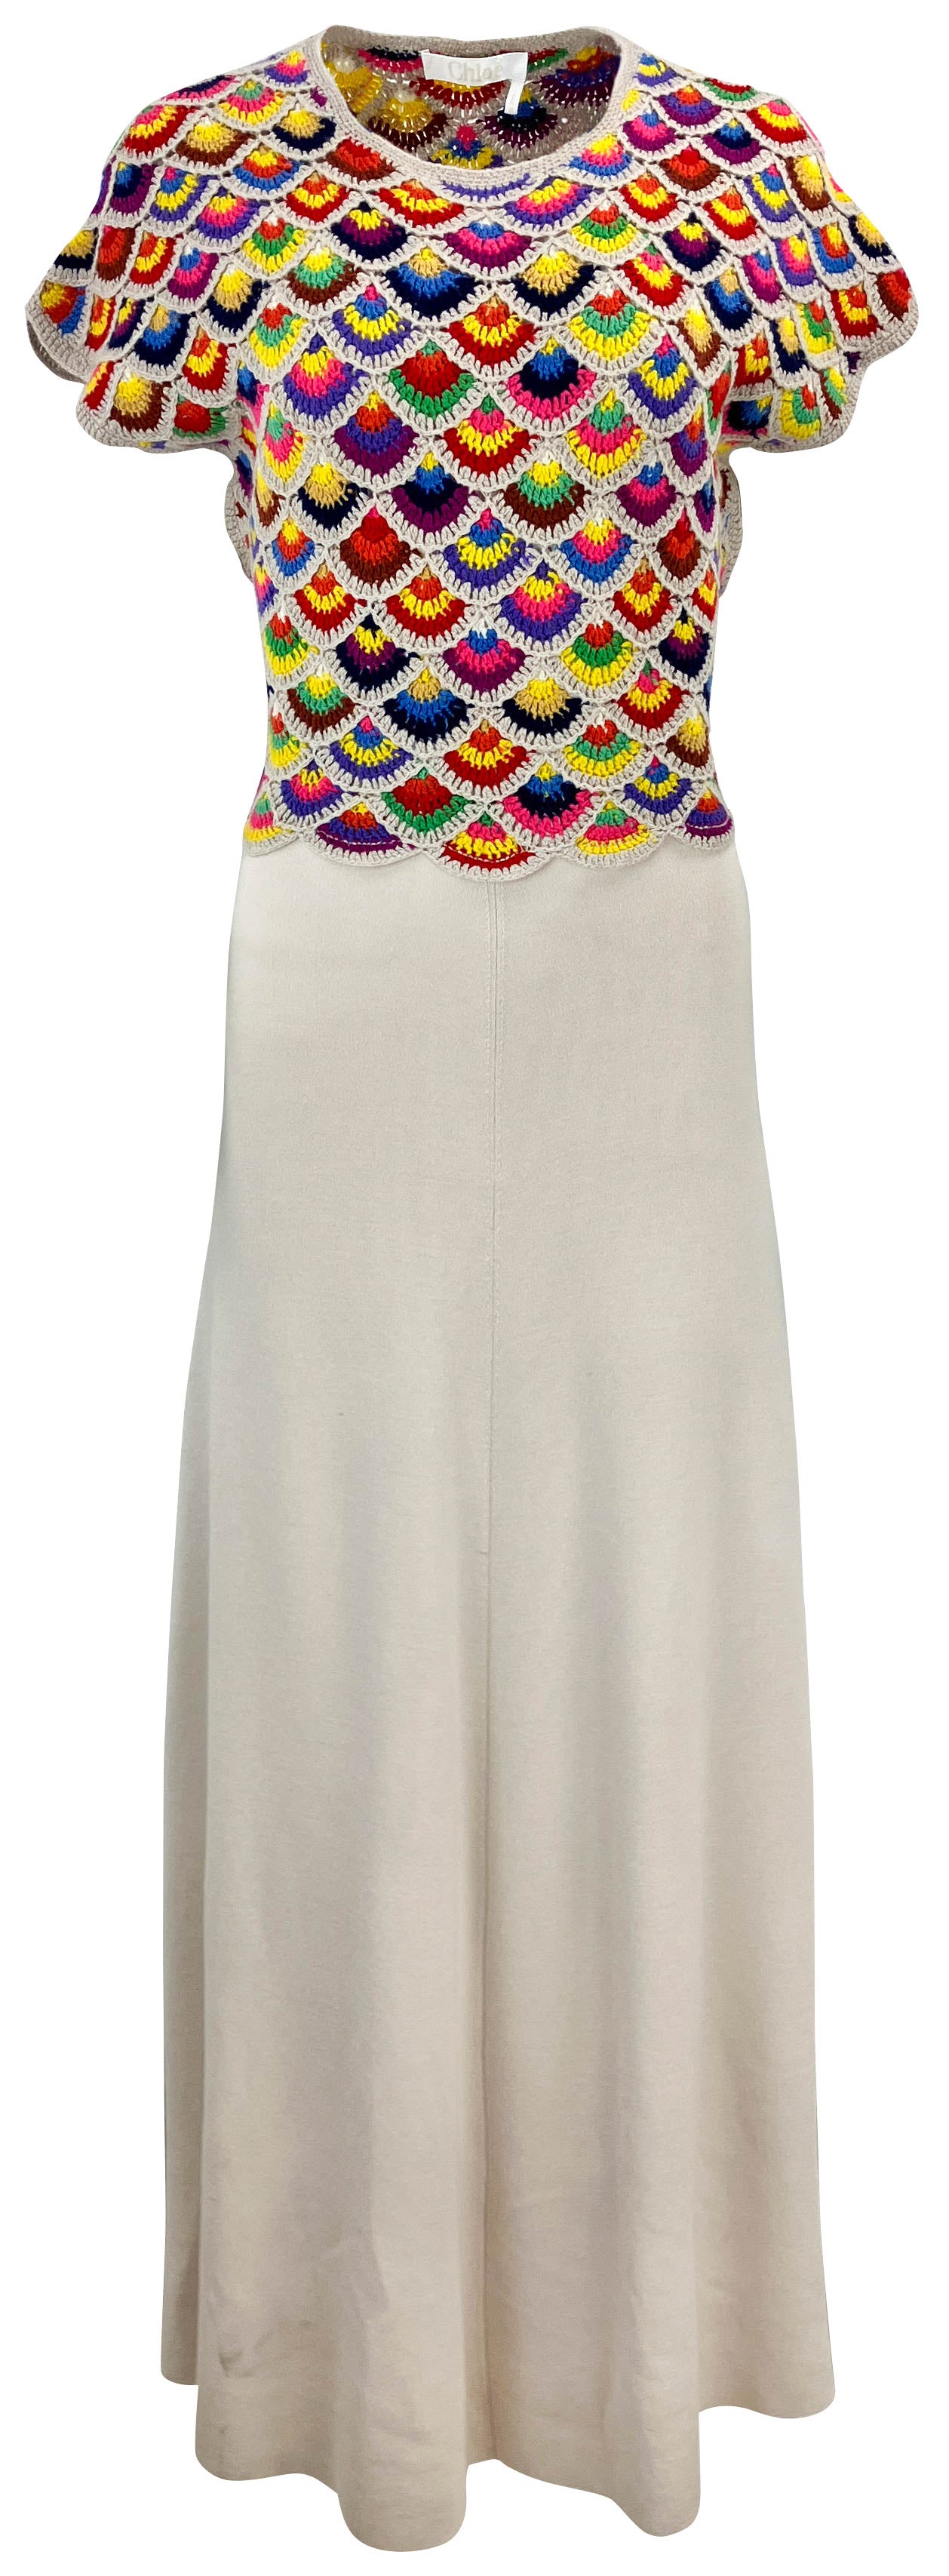 Chloe Wing-Shoulder Scalloped Crochet Knit Dress in Multi - Discounts on Chloé at UAL